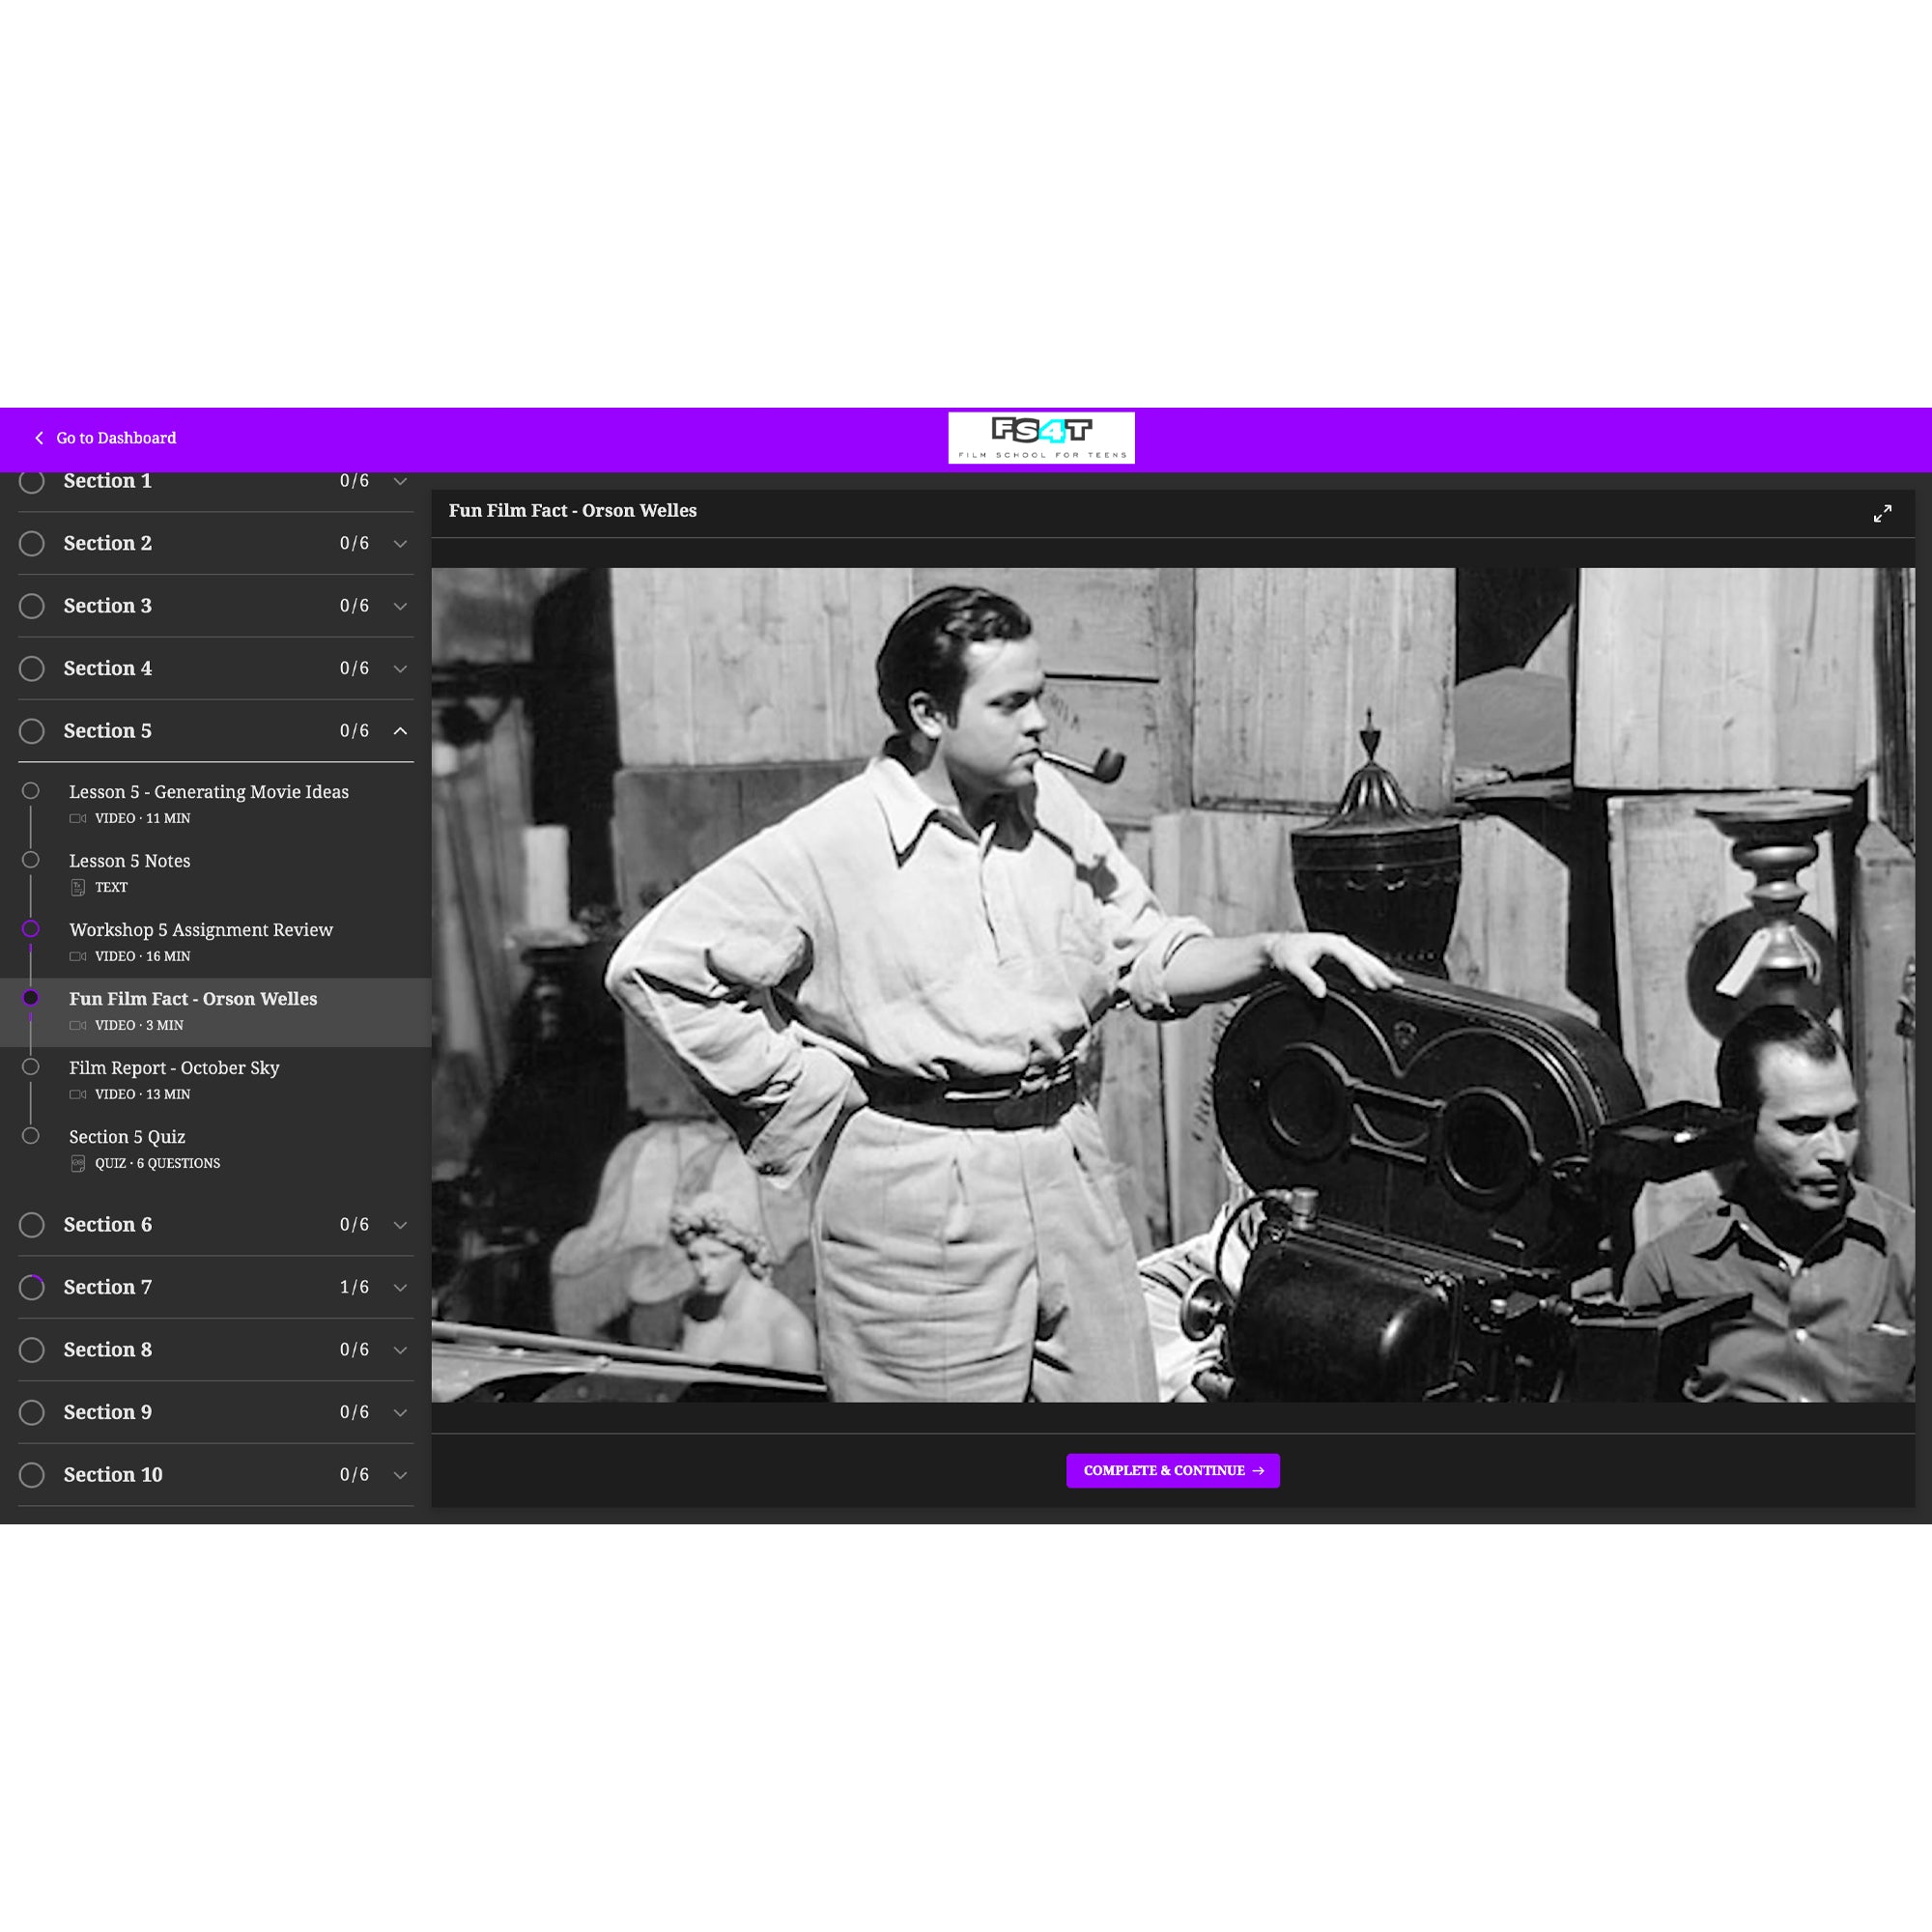 A screenshot of the Intro to Filmmaking program. There is a menu on the left and the background is a dark gray and black with a bright purple top and button at the bottom. The middle of the screen shows a video shot of an old black and white film crew in the middle of filming a movie. The director is standing with his left hand propped up on top of a large film camera while smoking a pipe. In the background is a sitting man, stacked large wood crates, a stone woman statue, a lamp, and a candle.